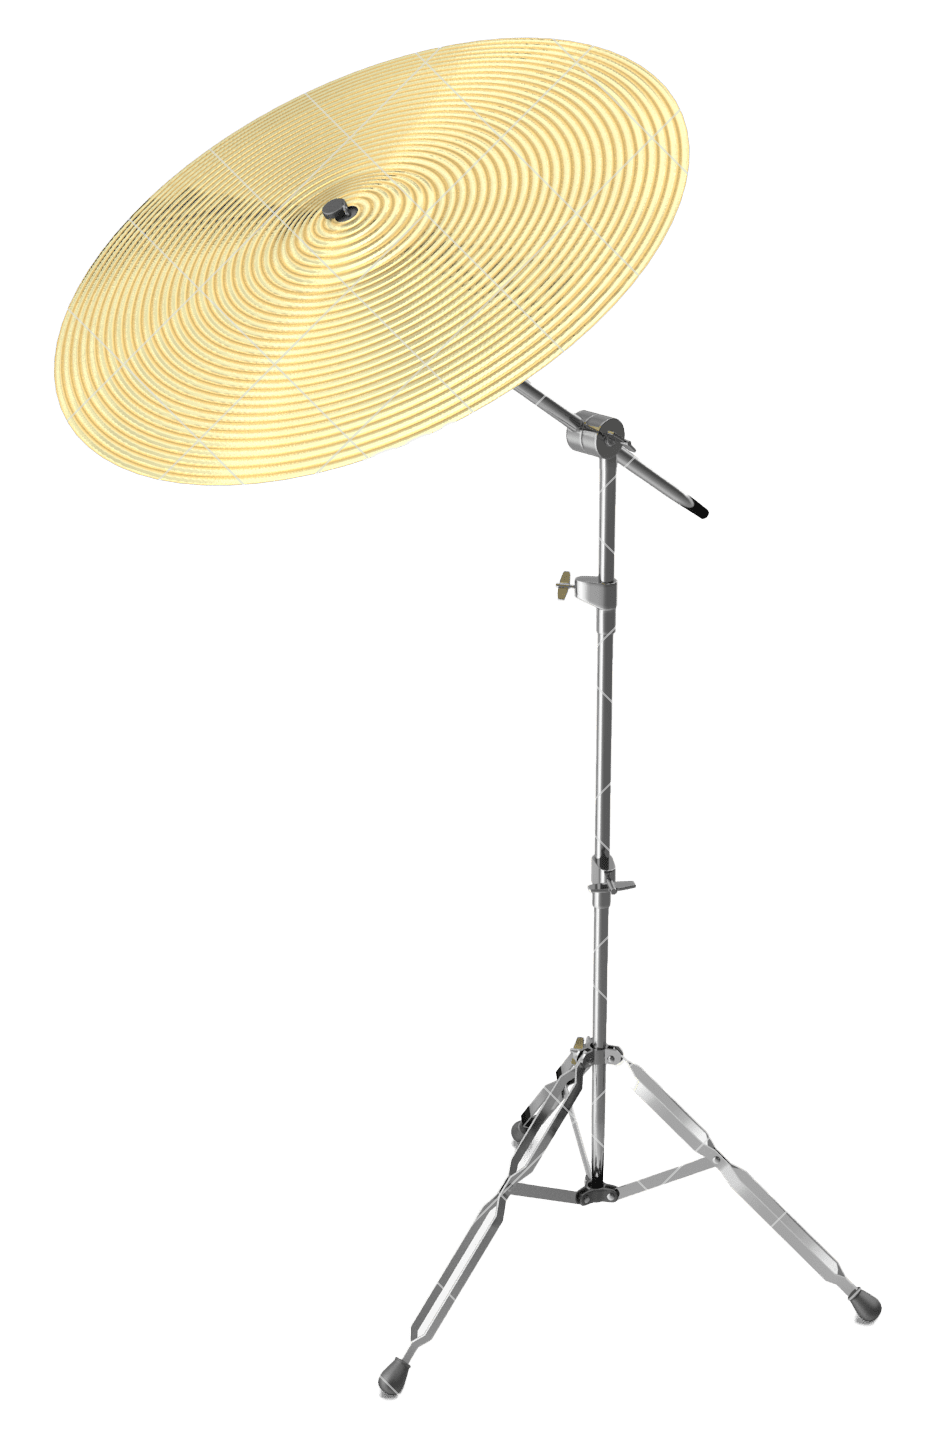 A photo of a drum cymbal.